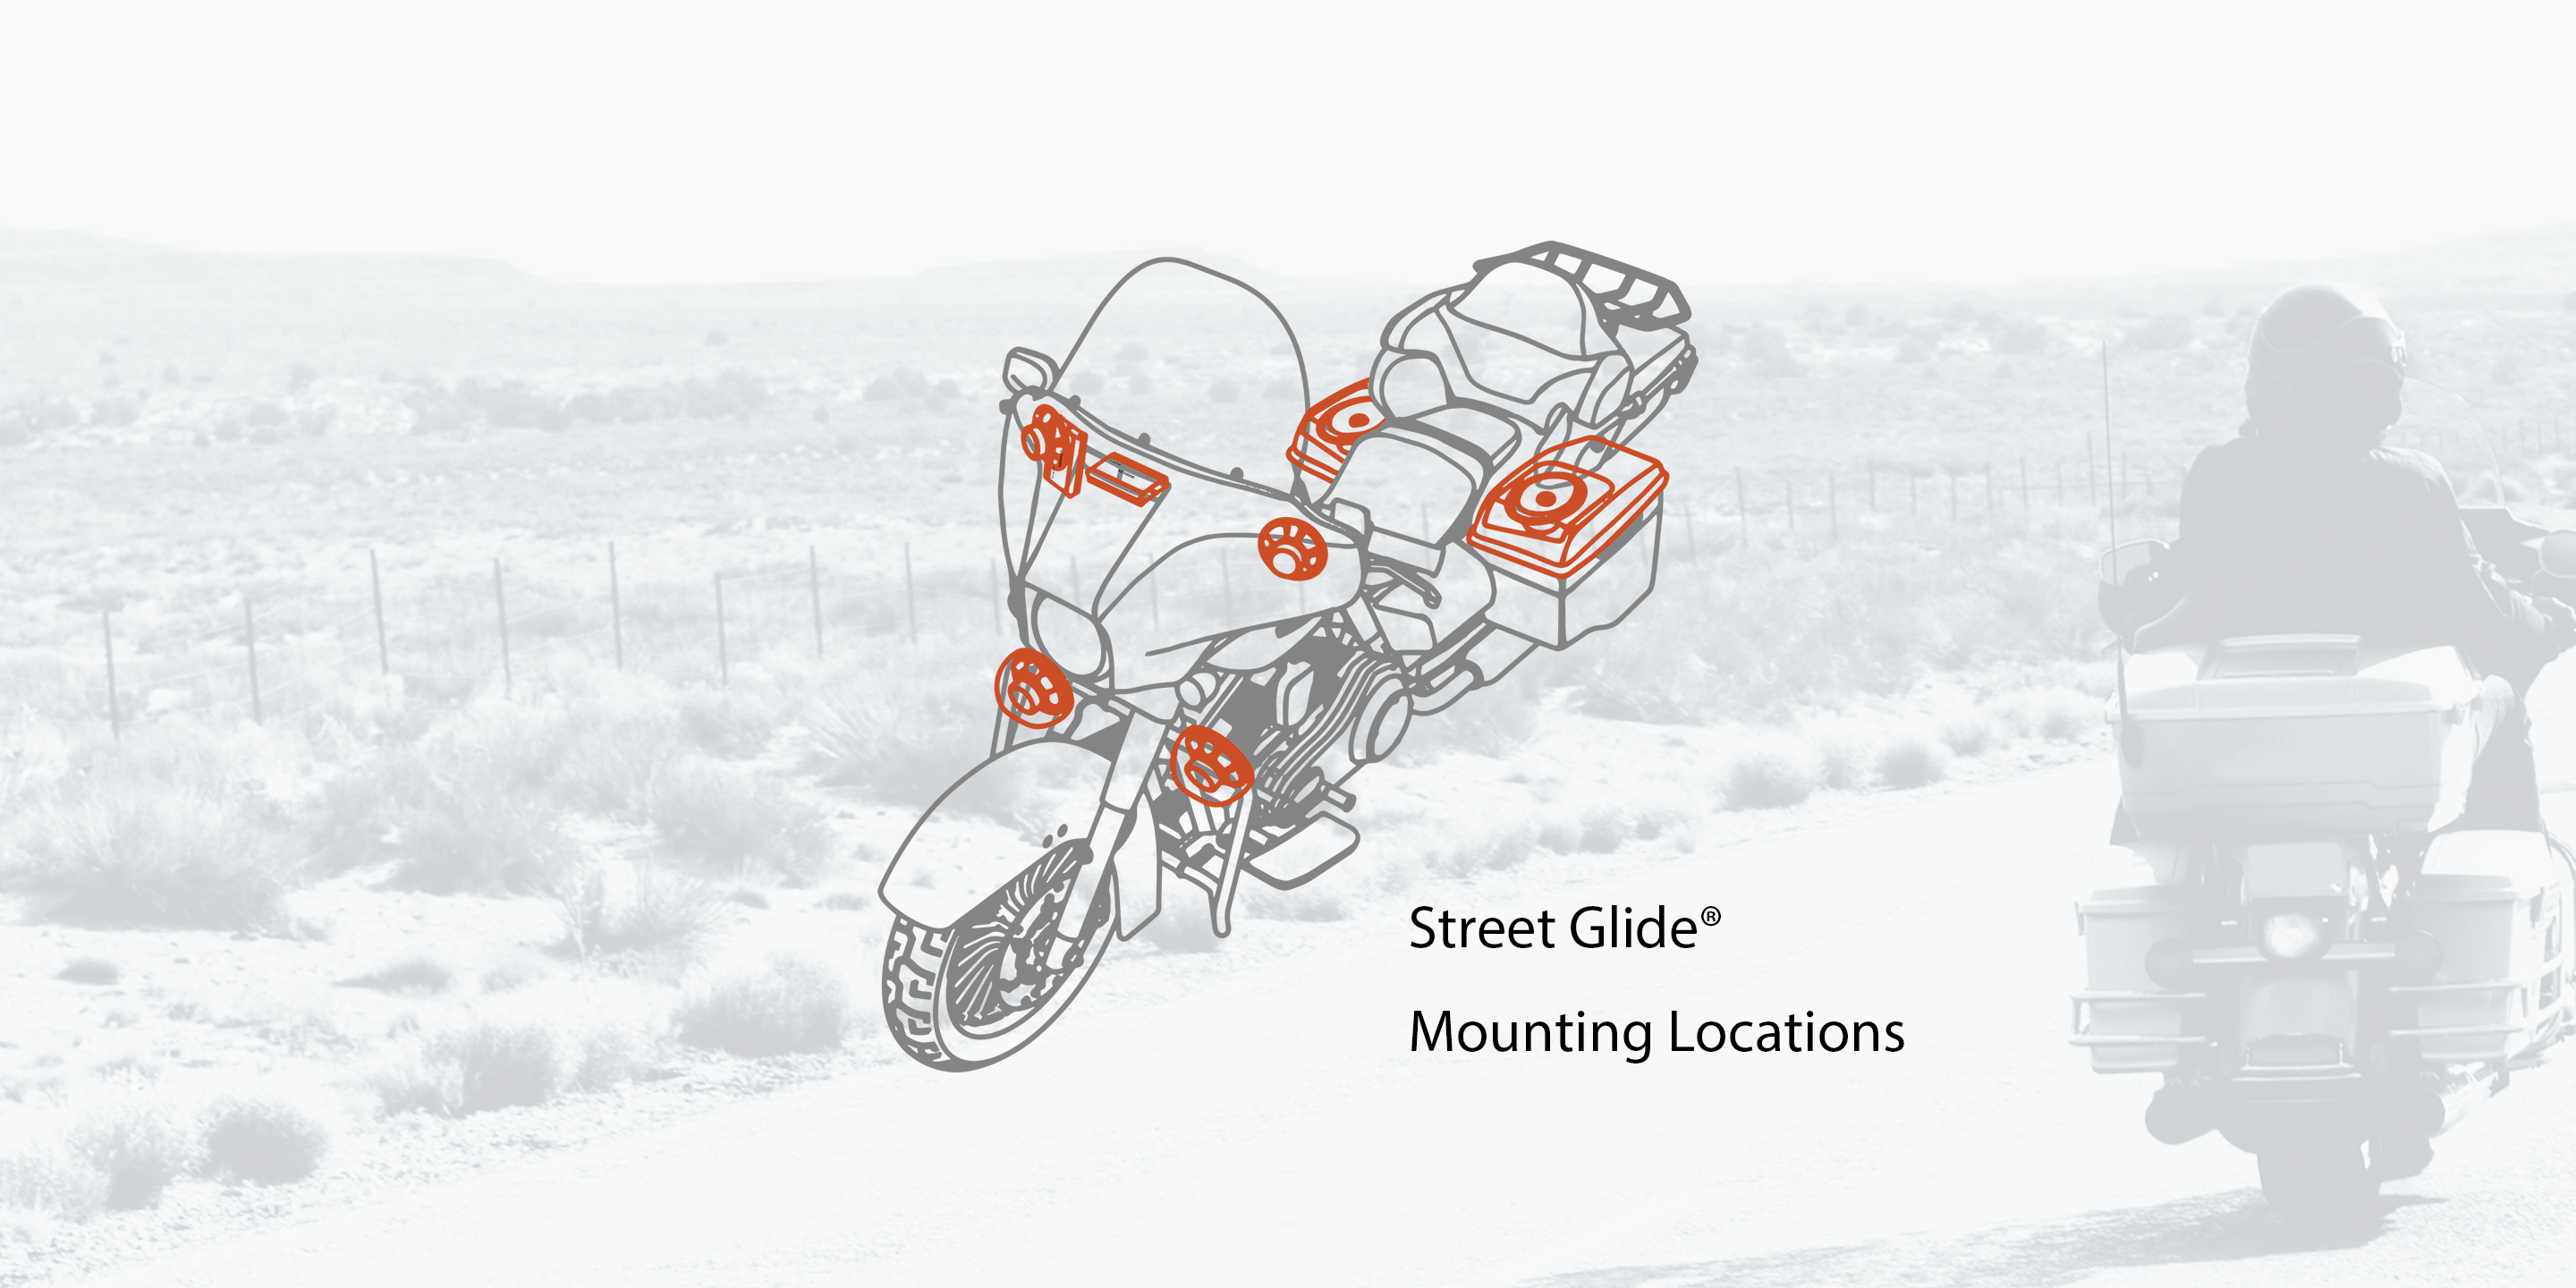 Street Glide® Mounting Locations